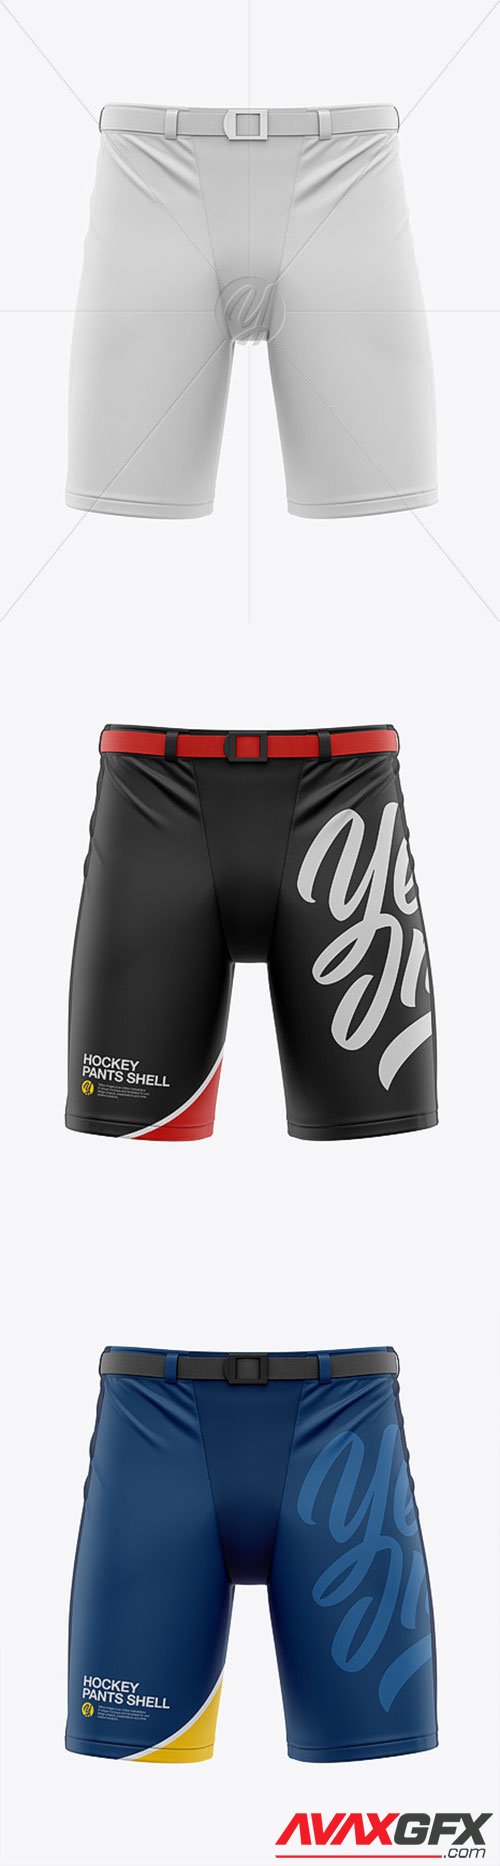 Hockey Pants Shell - Front View 52484